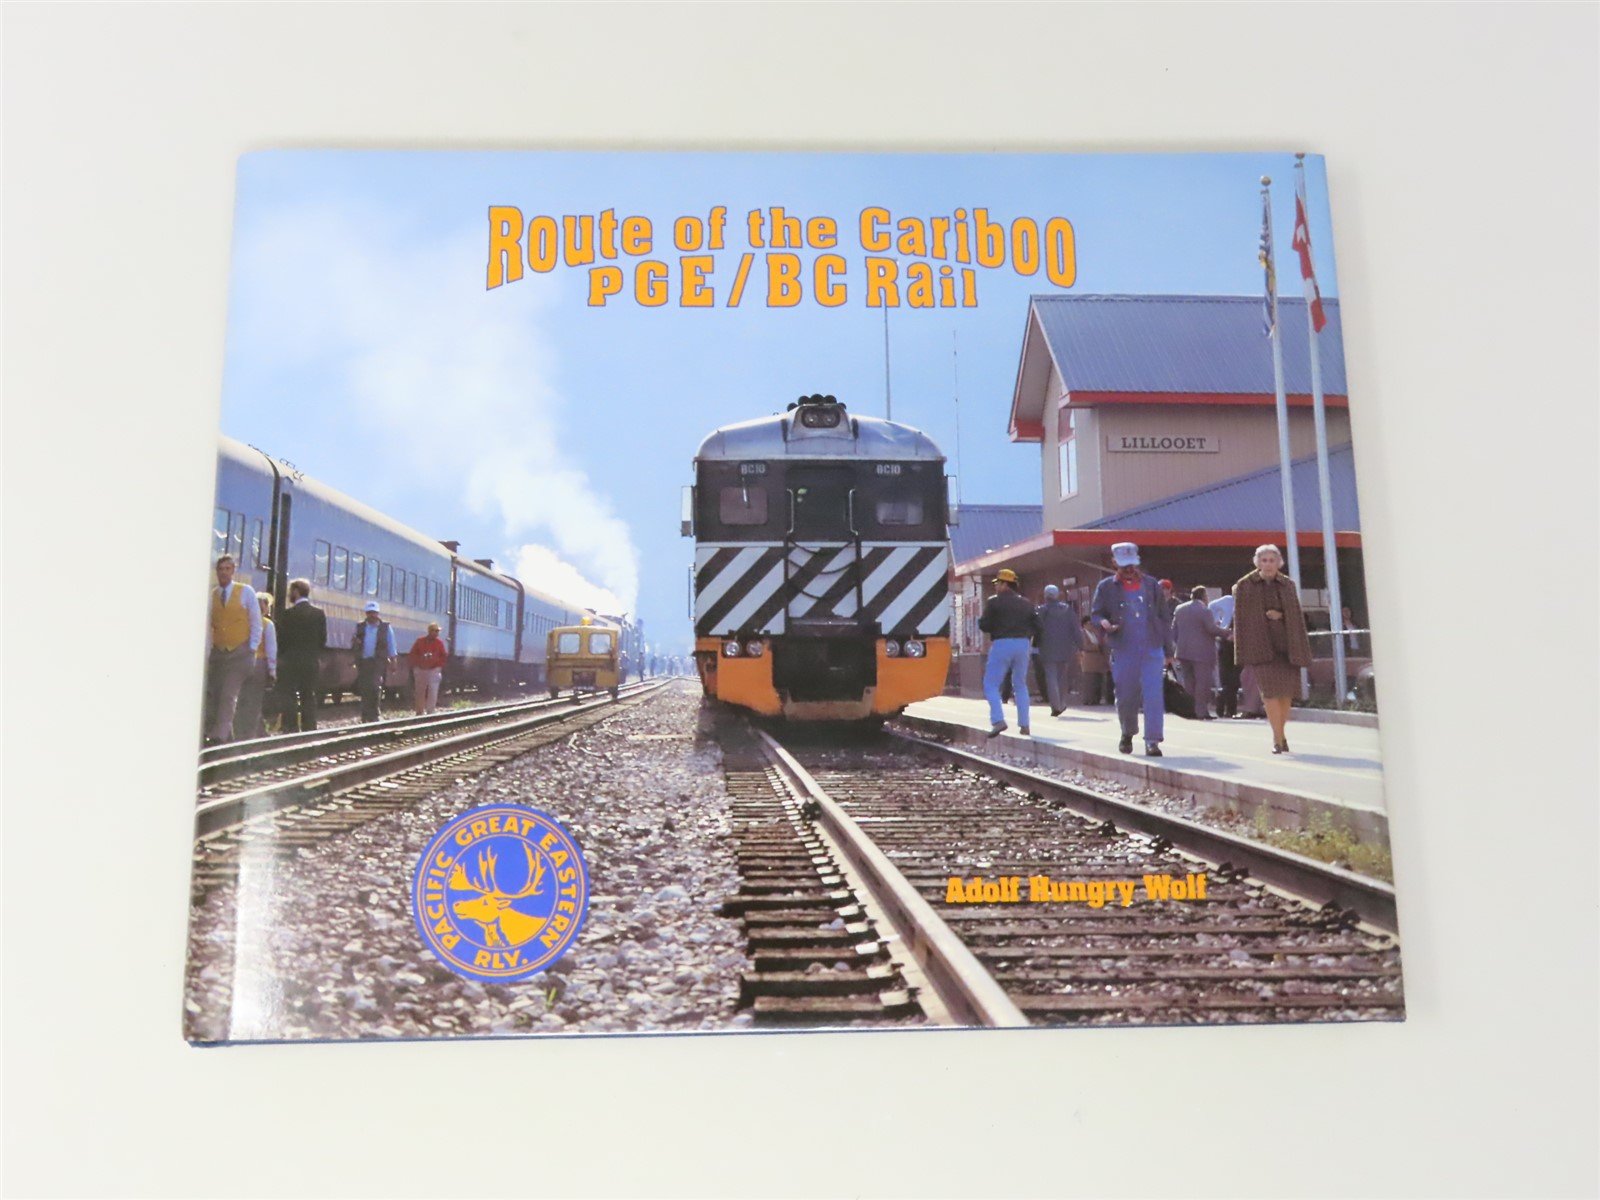 Route of the Cariboo PGE/BC Rail by Adolf Hungry Wolf ©1994 HC Book